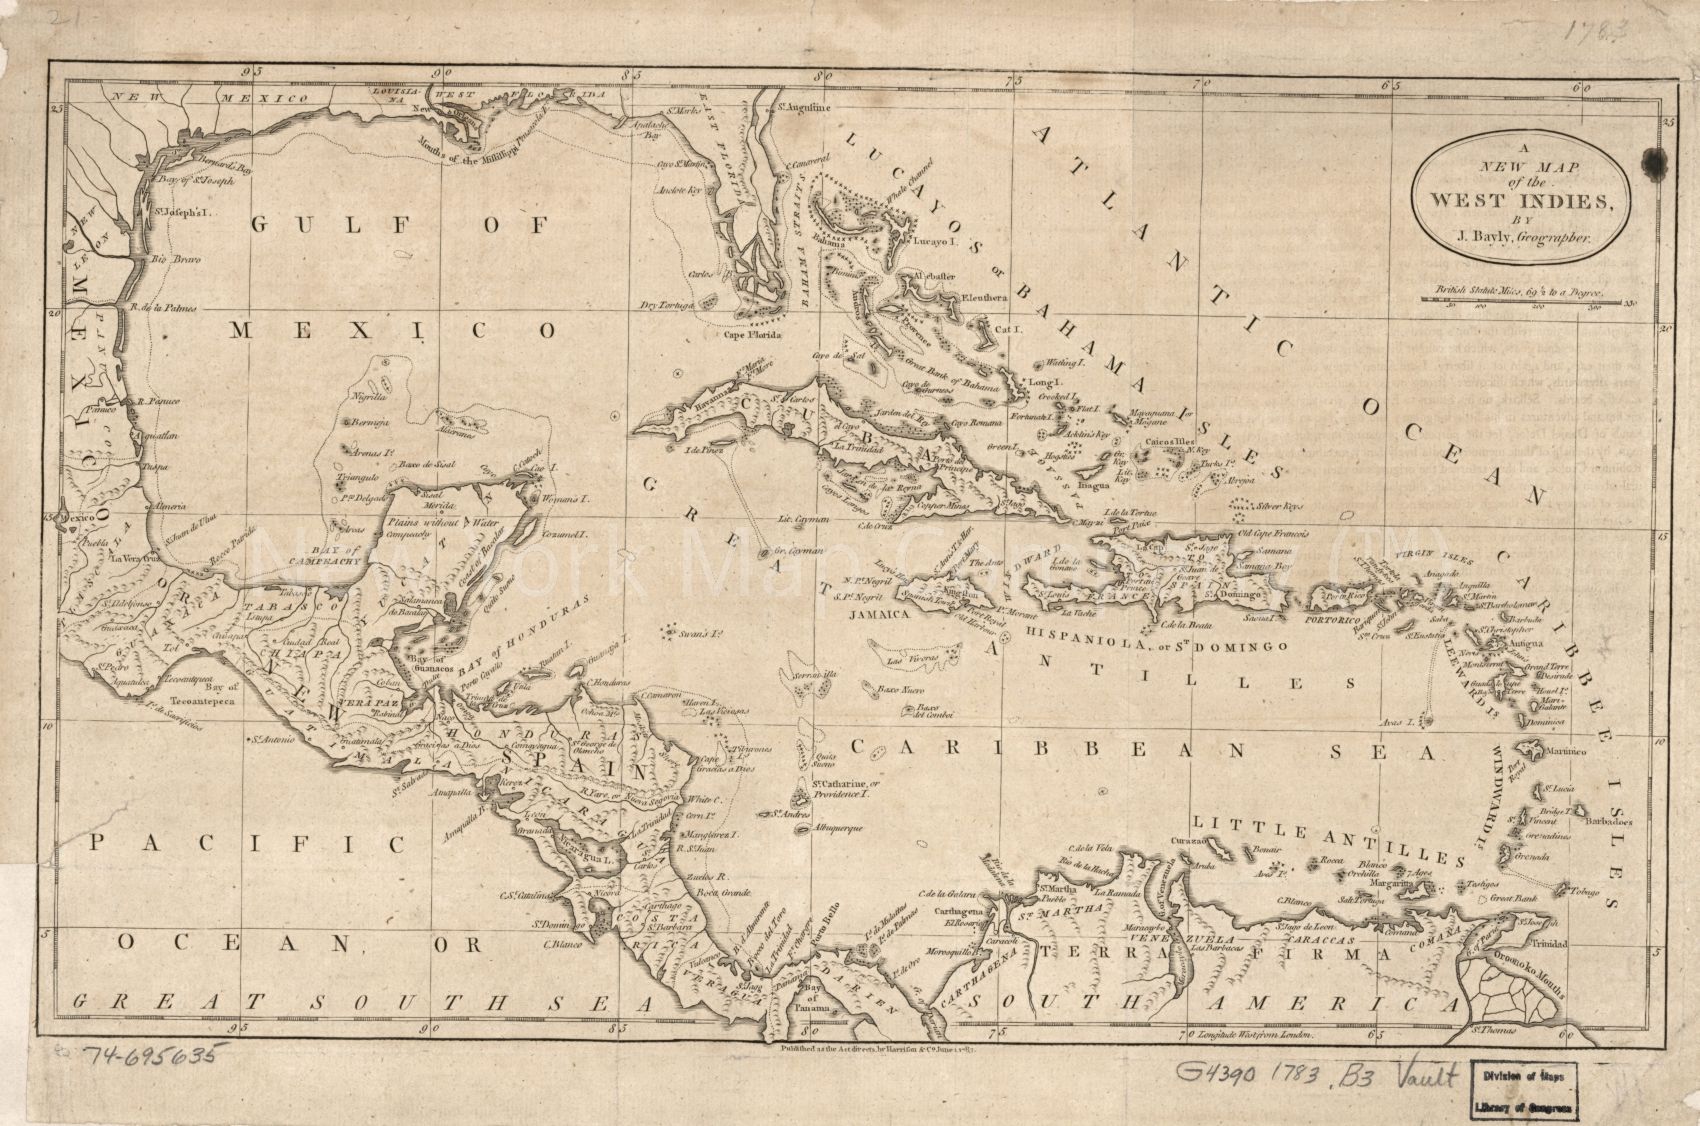 1783 map A new map of the West Indies,. Map Subjects: Caribbean Area | West Indies